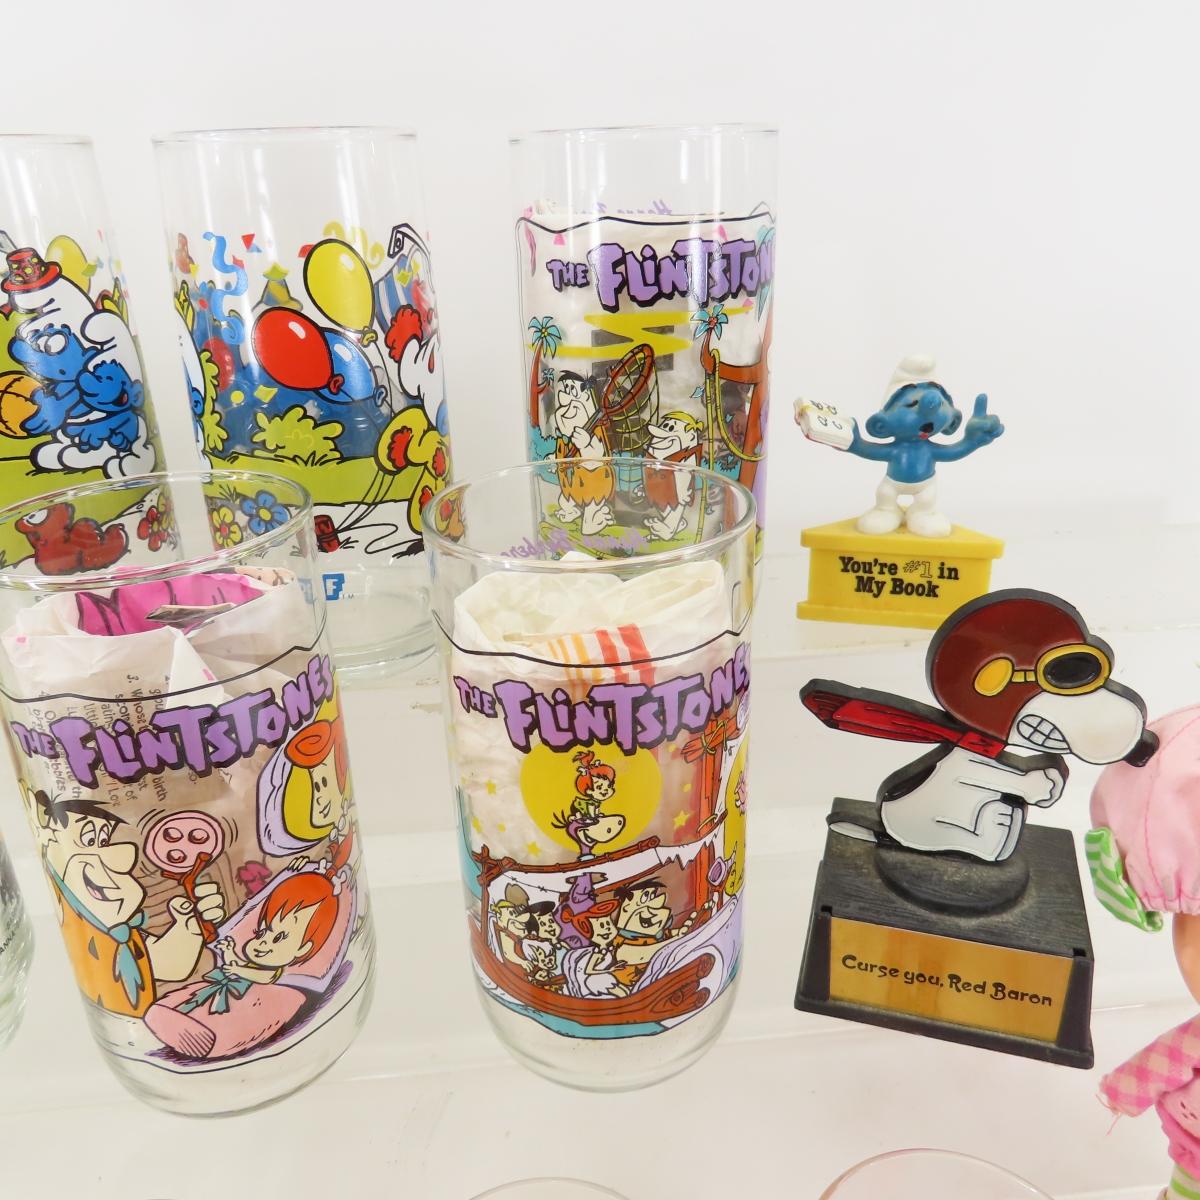 Character Glasses, Beanie Babies, and more